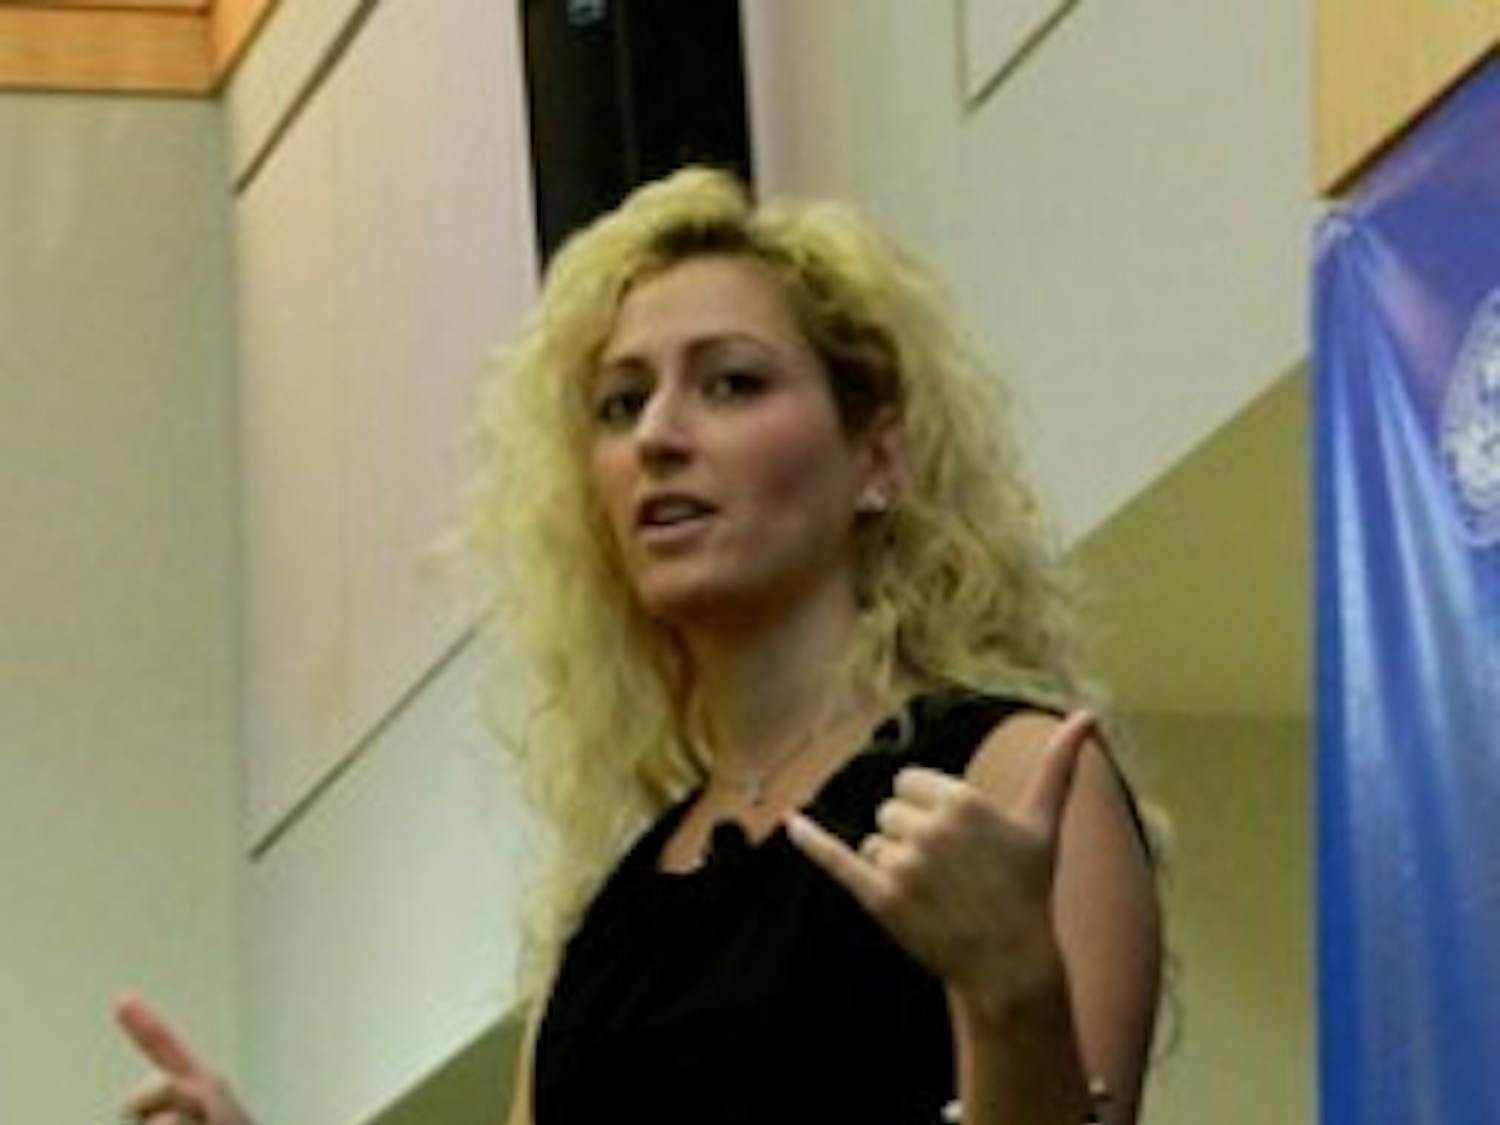 Jane McGonigal urged students to spend more time playing online video games. She stressed the positive effects that playing games have on people.